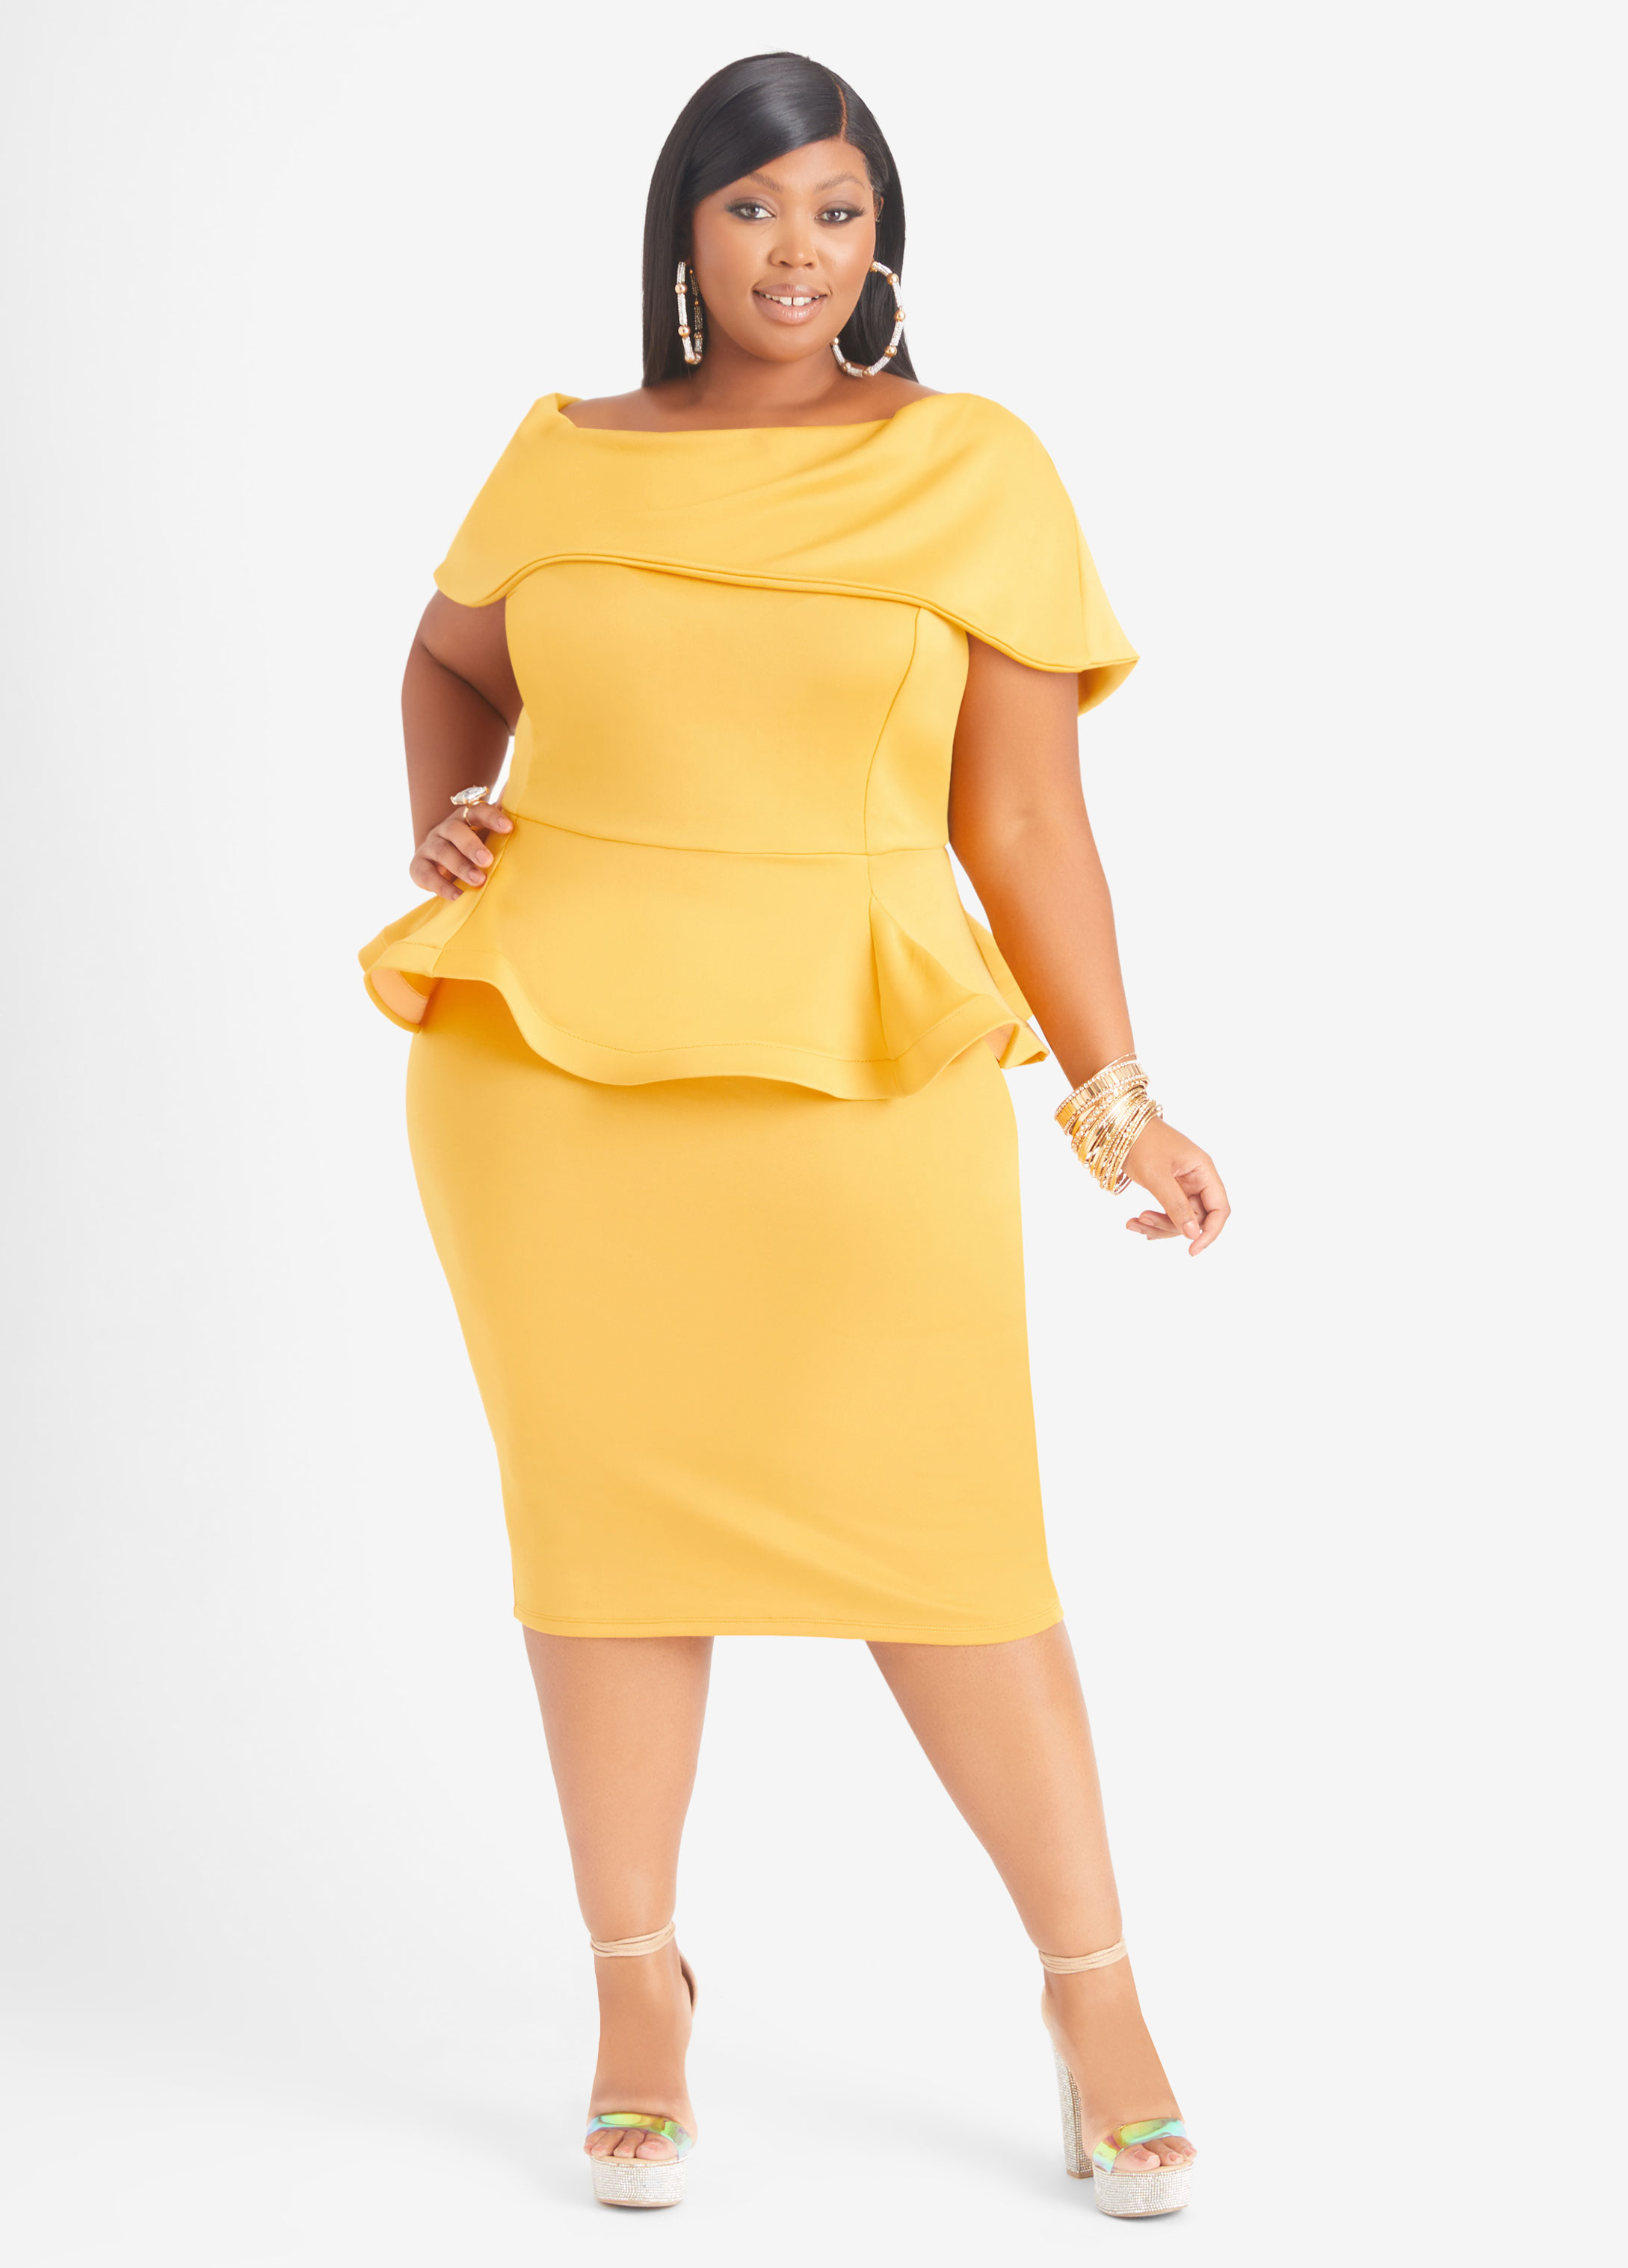 Plus Size Bodycon Dress Evening Cocktail Holiday Bodycon Dresses